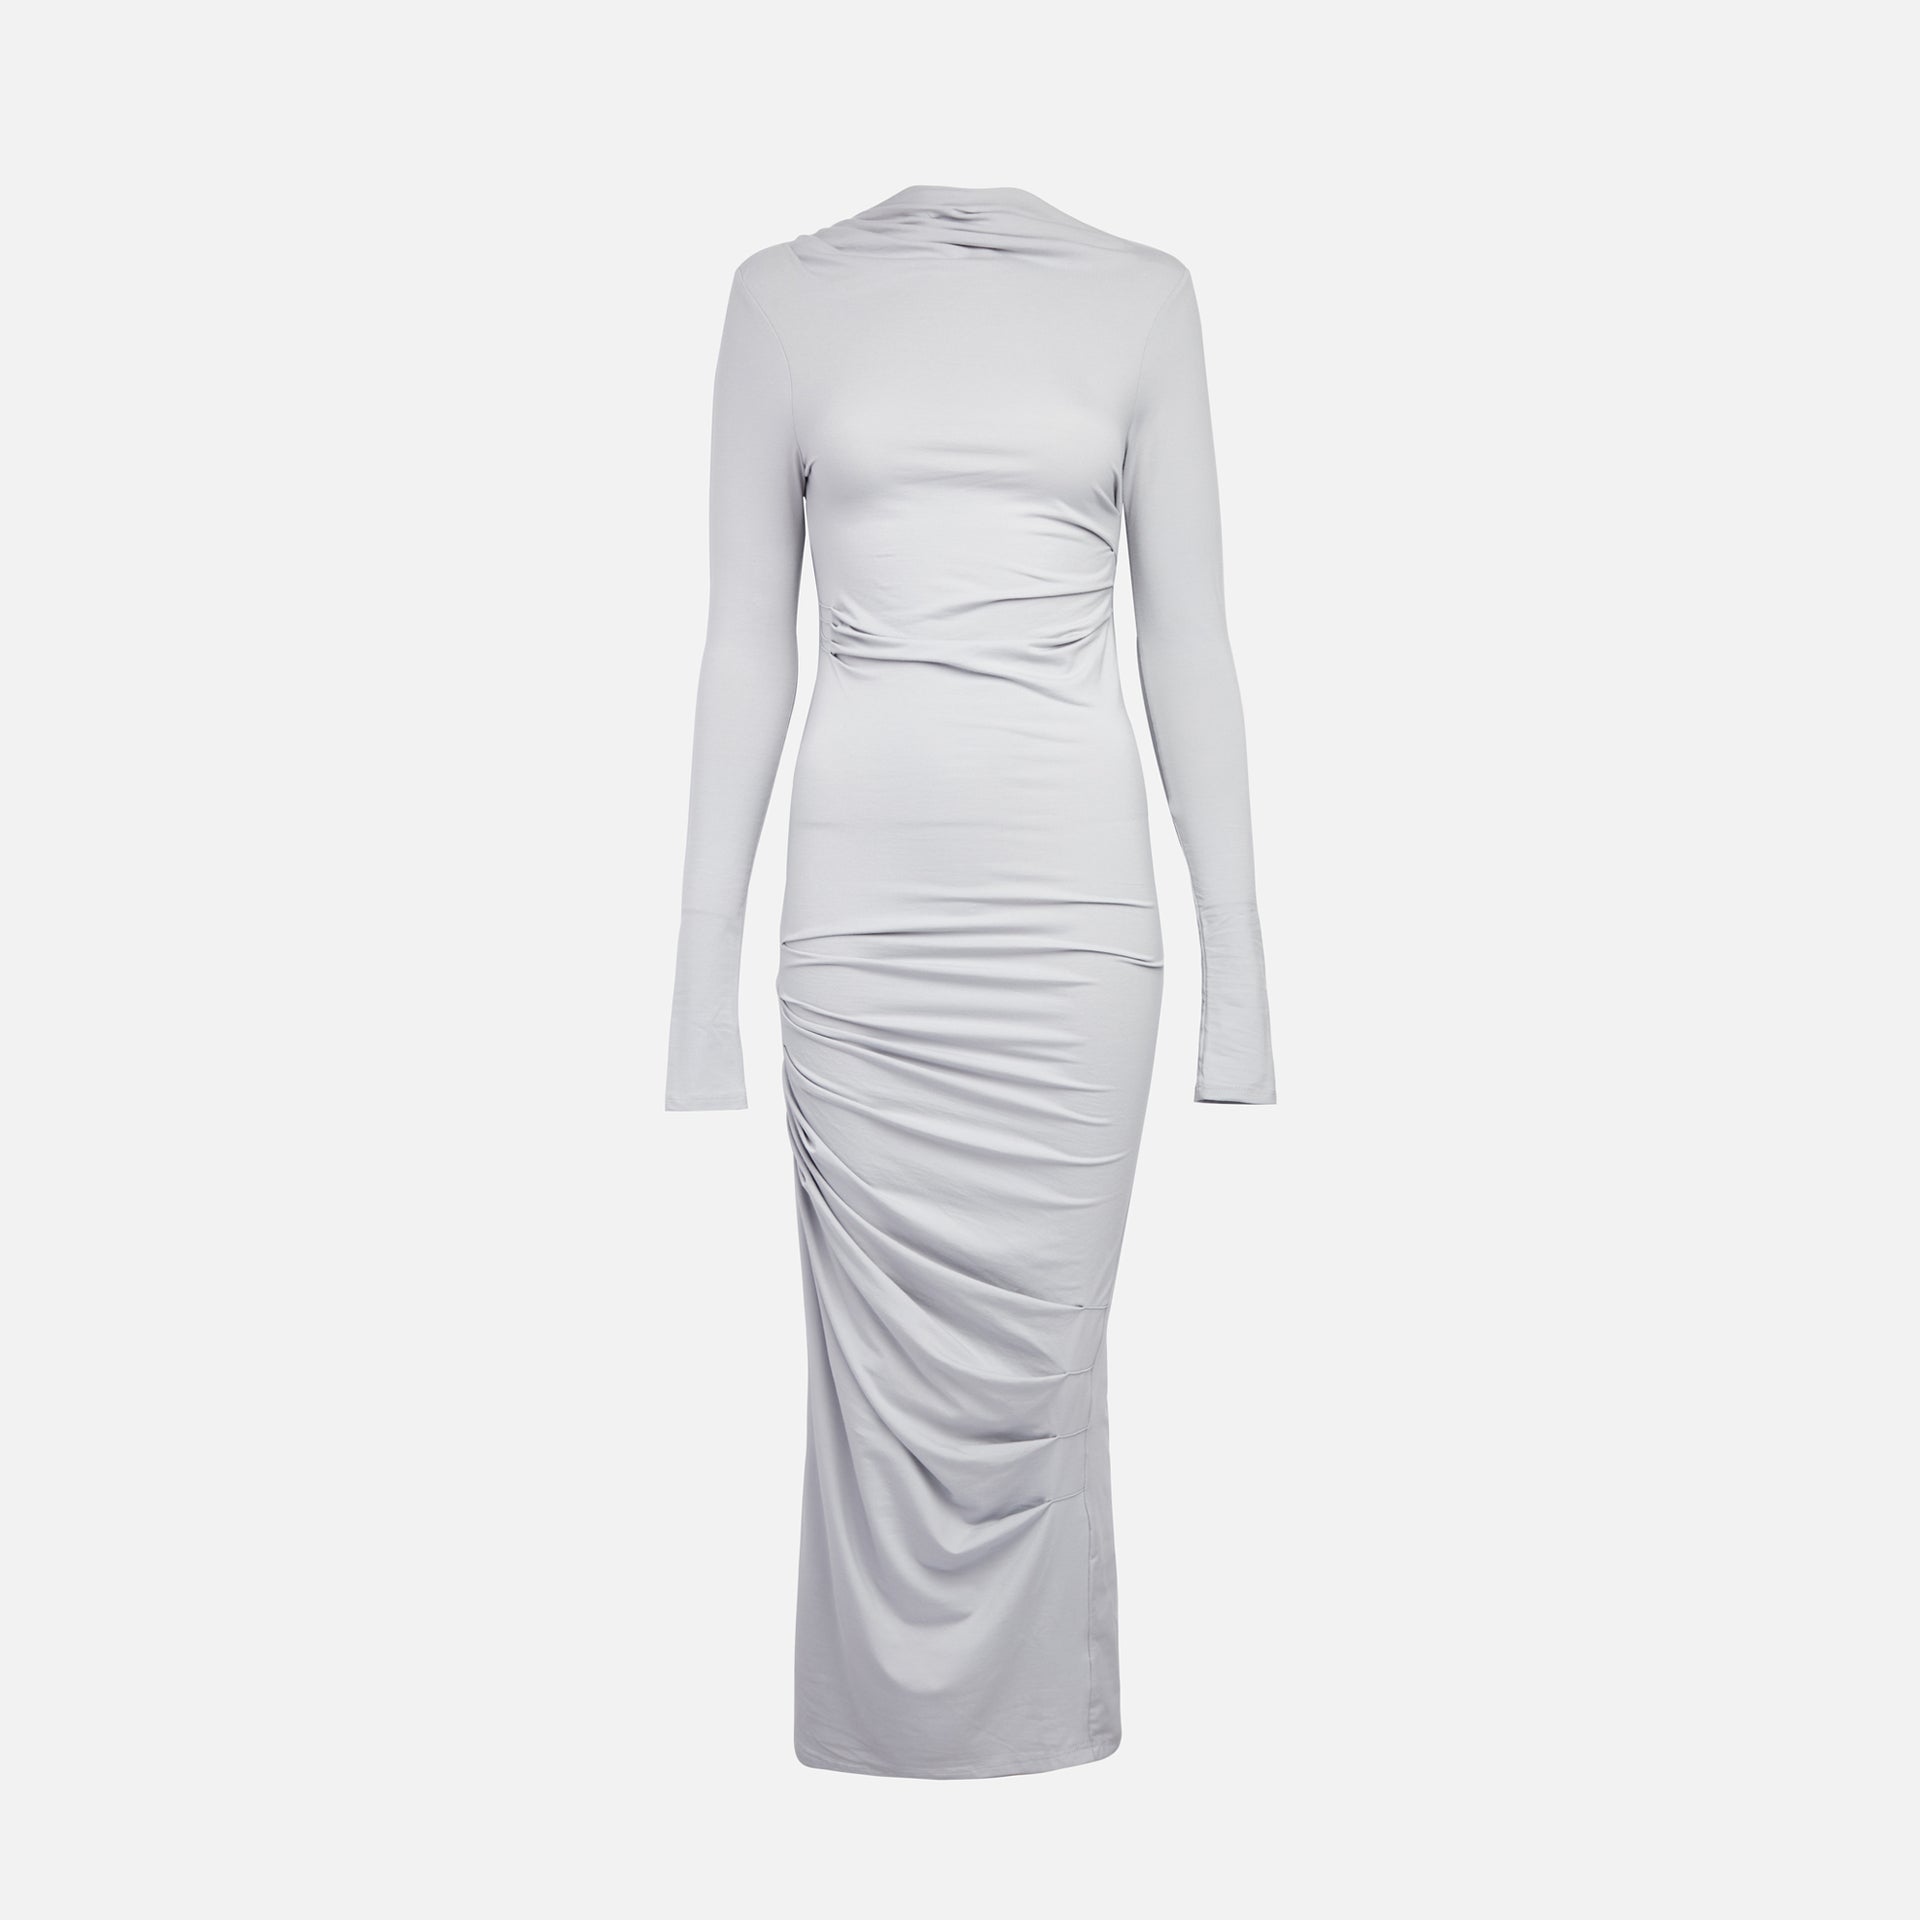 The Line by K Asher Dress - Silver